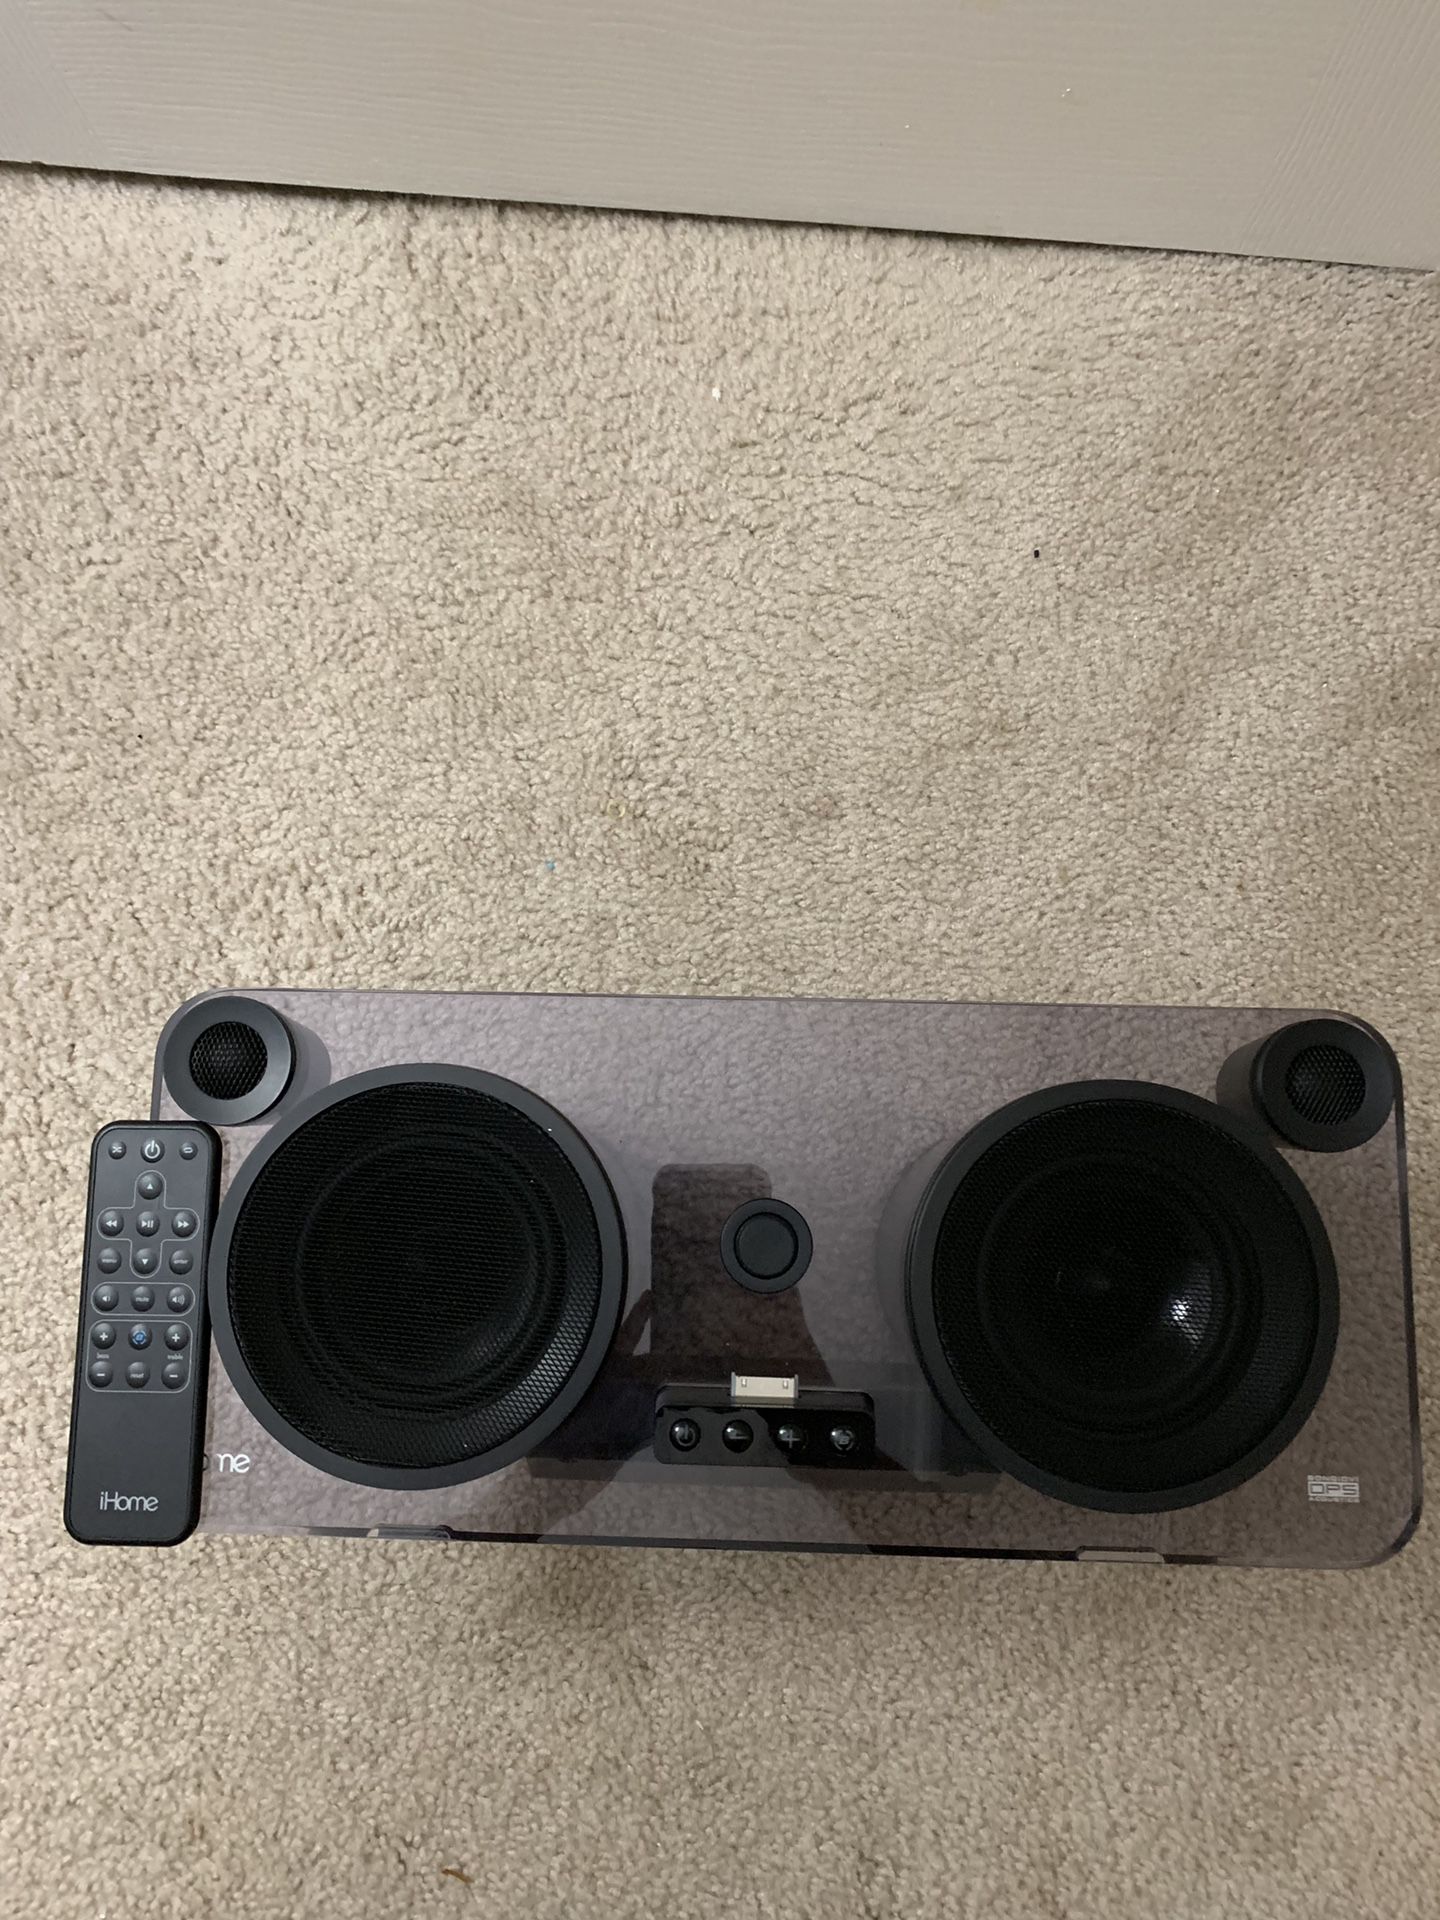 iHome speaker with iHome Remote